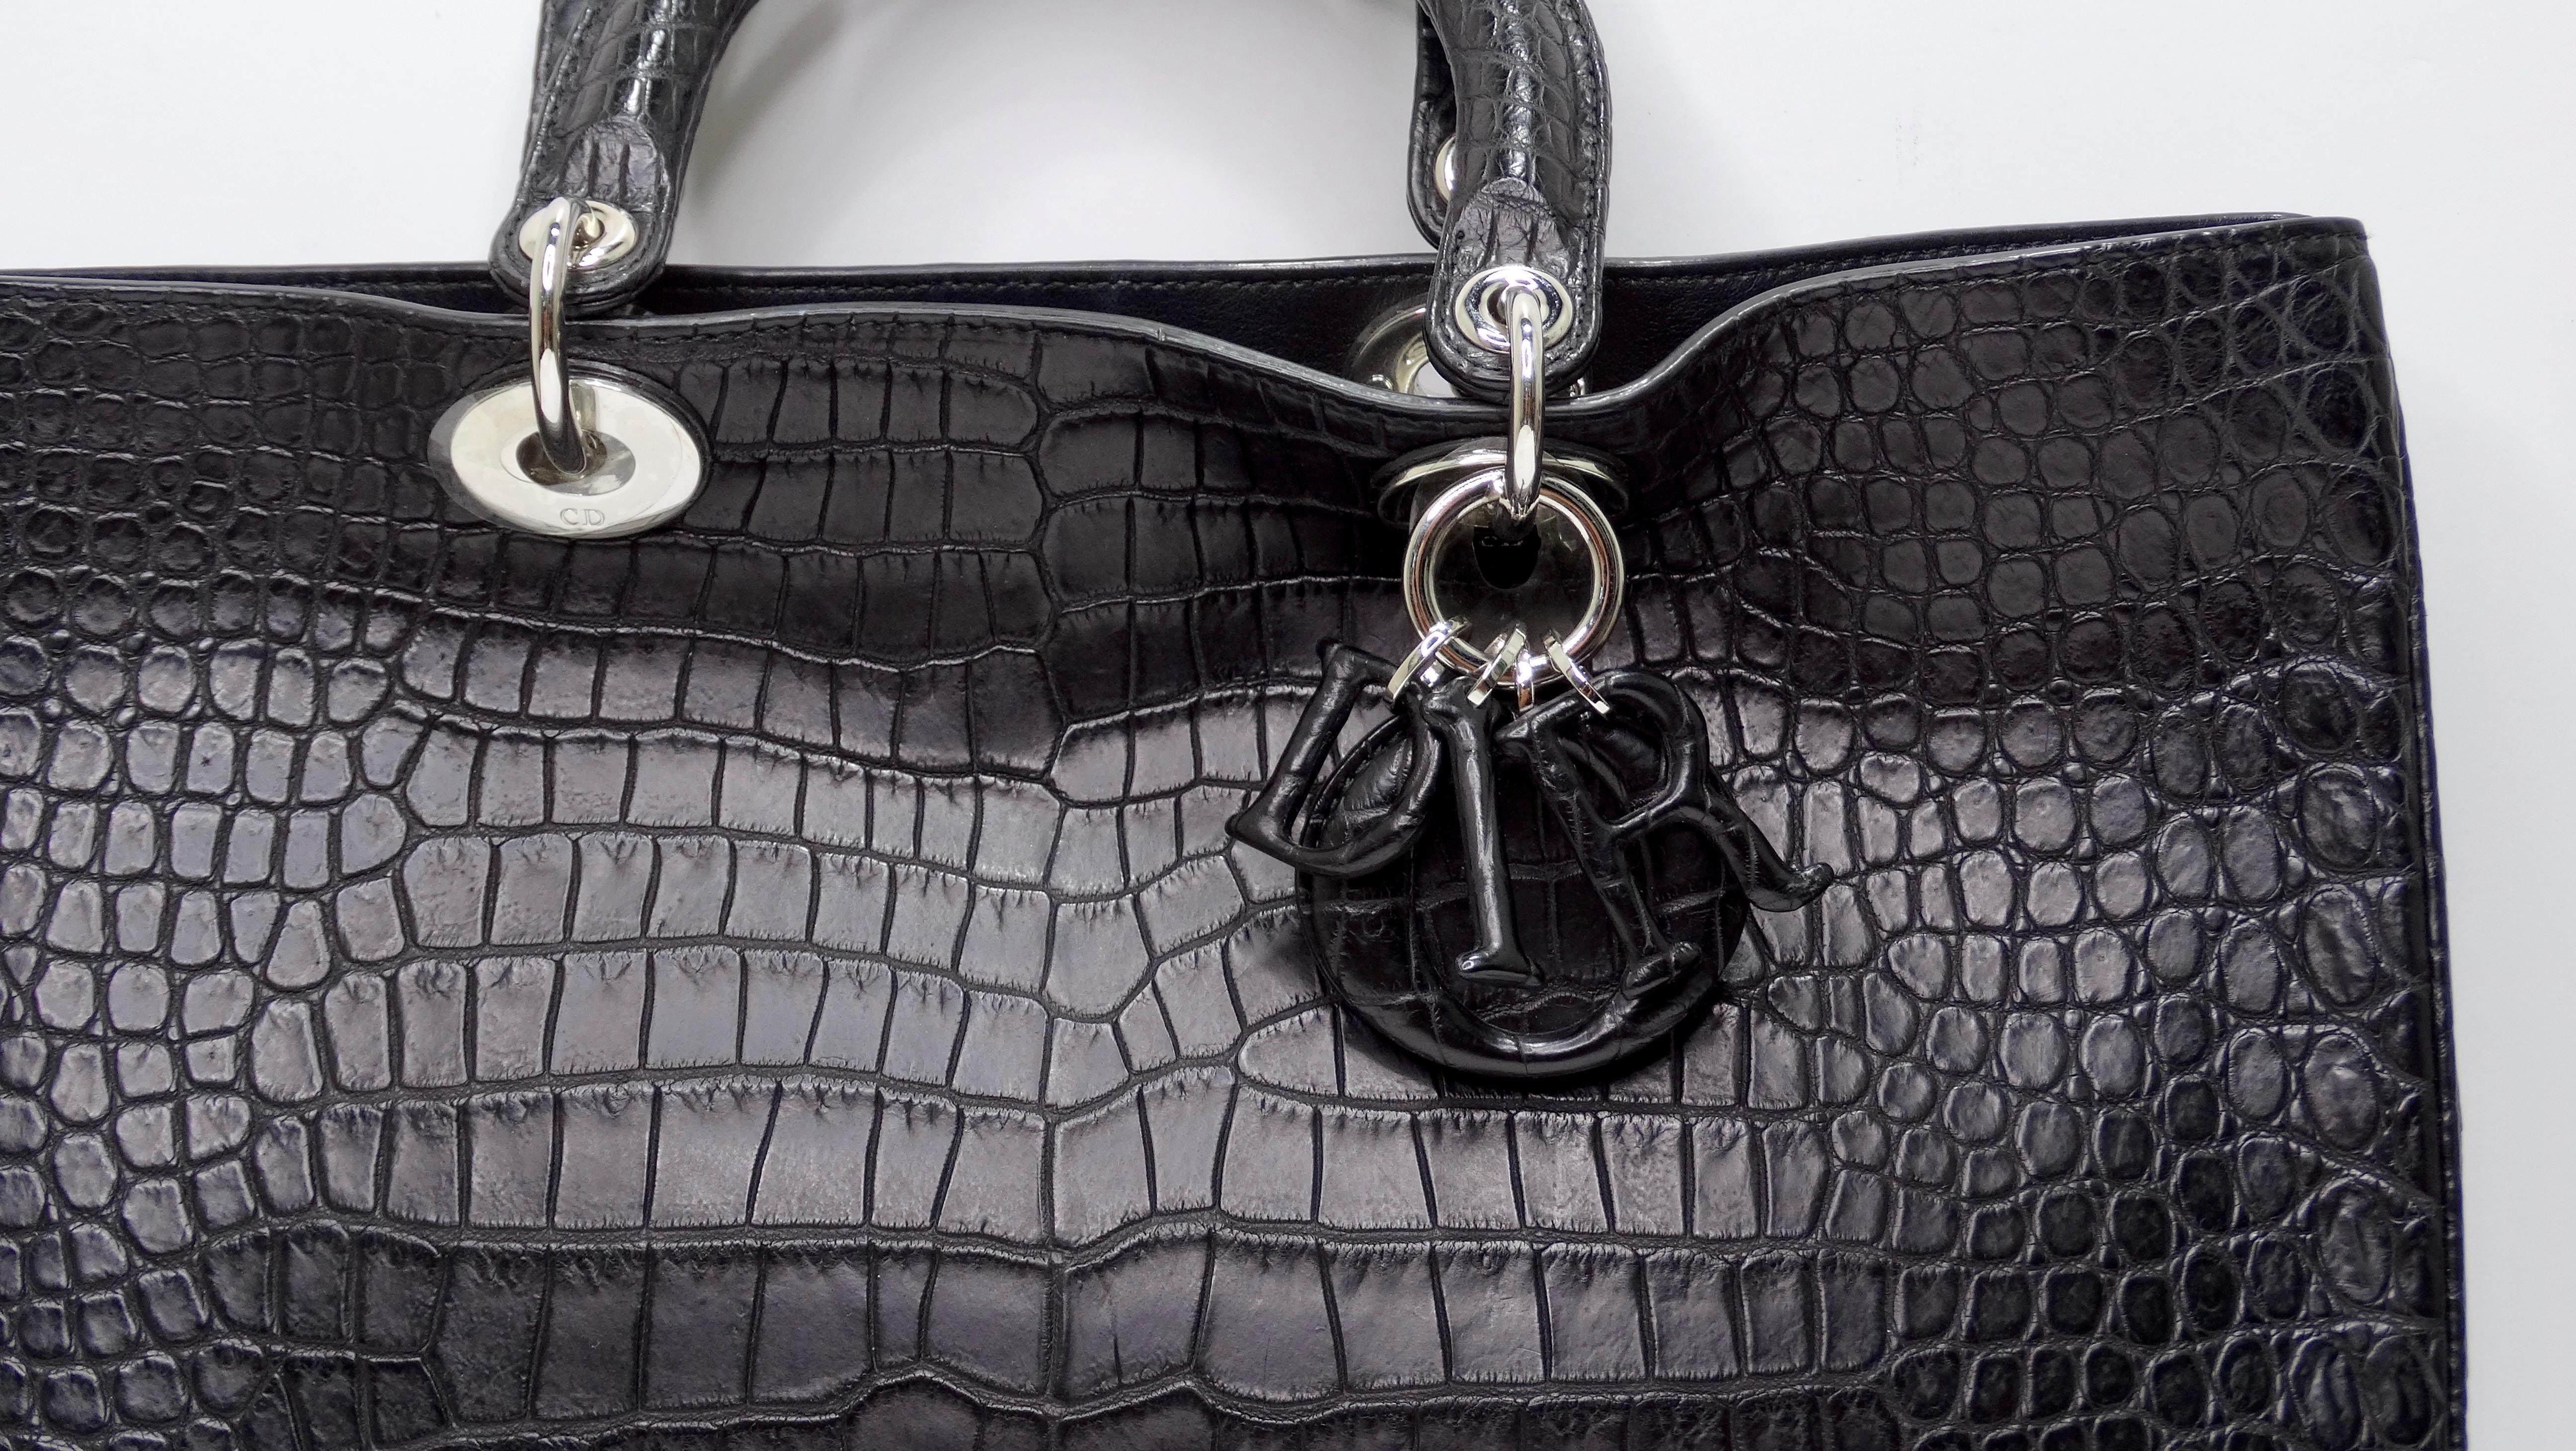 FOUND! A beautifully unique and rare Lady Dior! A timeless and significant design define this impeccable Lady Dior tote. An iconic creation, this tote brings eternal poise, gracefulness, and elegance to your appearance. The crocodile leather adds